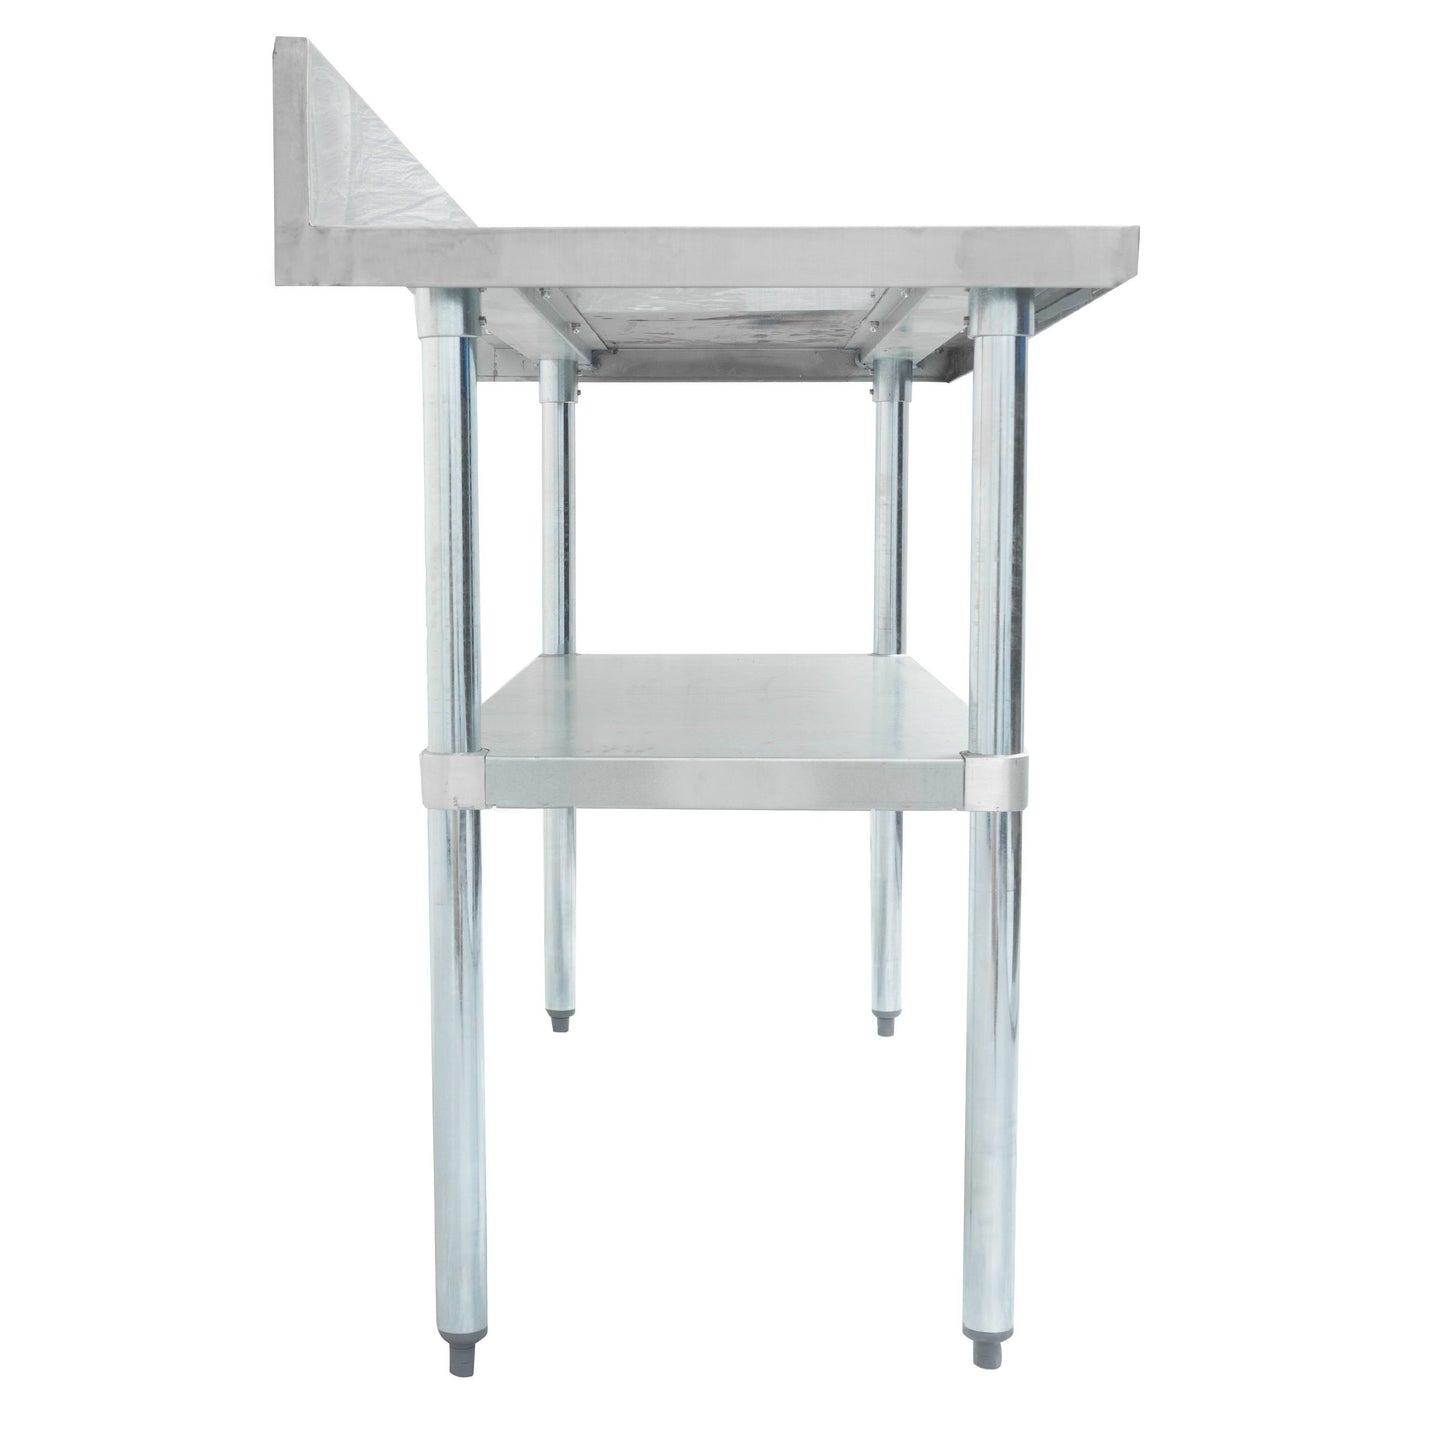 Thorinox DSST-2448-GS Table, 48"W x 24"D x 34"H, Stainless Steel Table with Galvanized Shelf